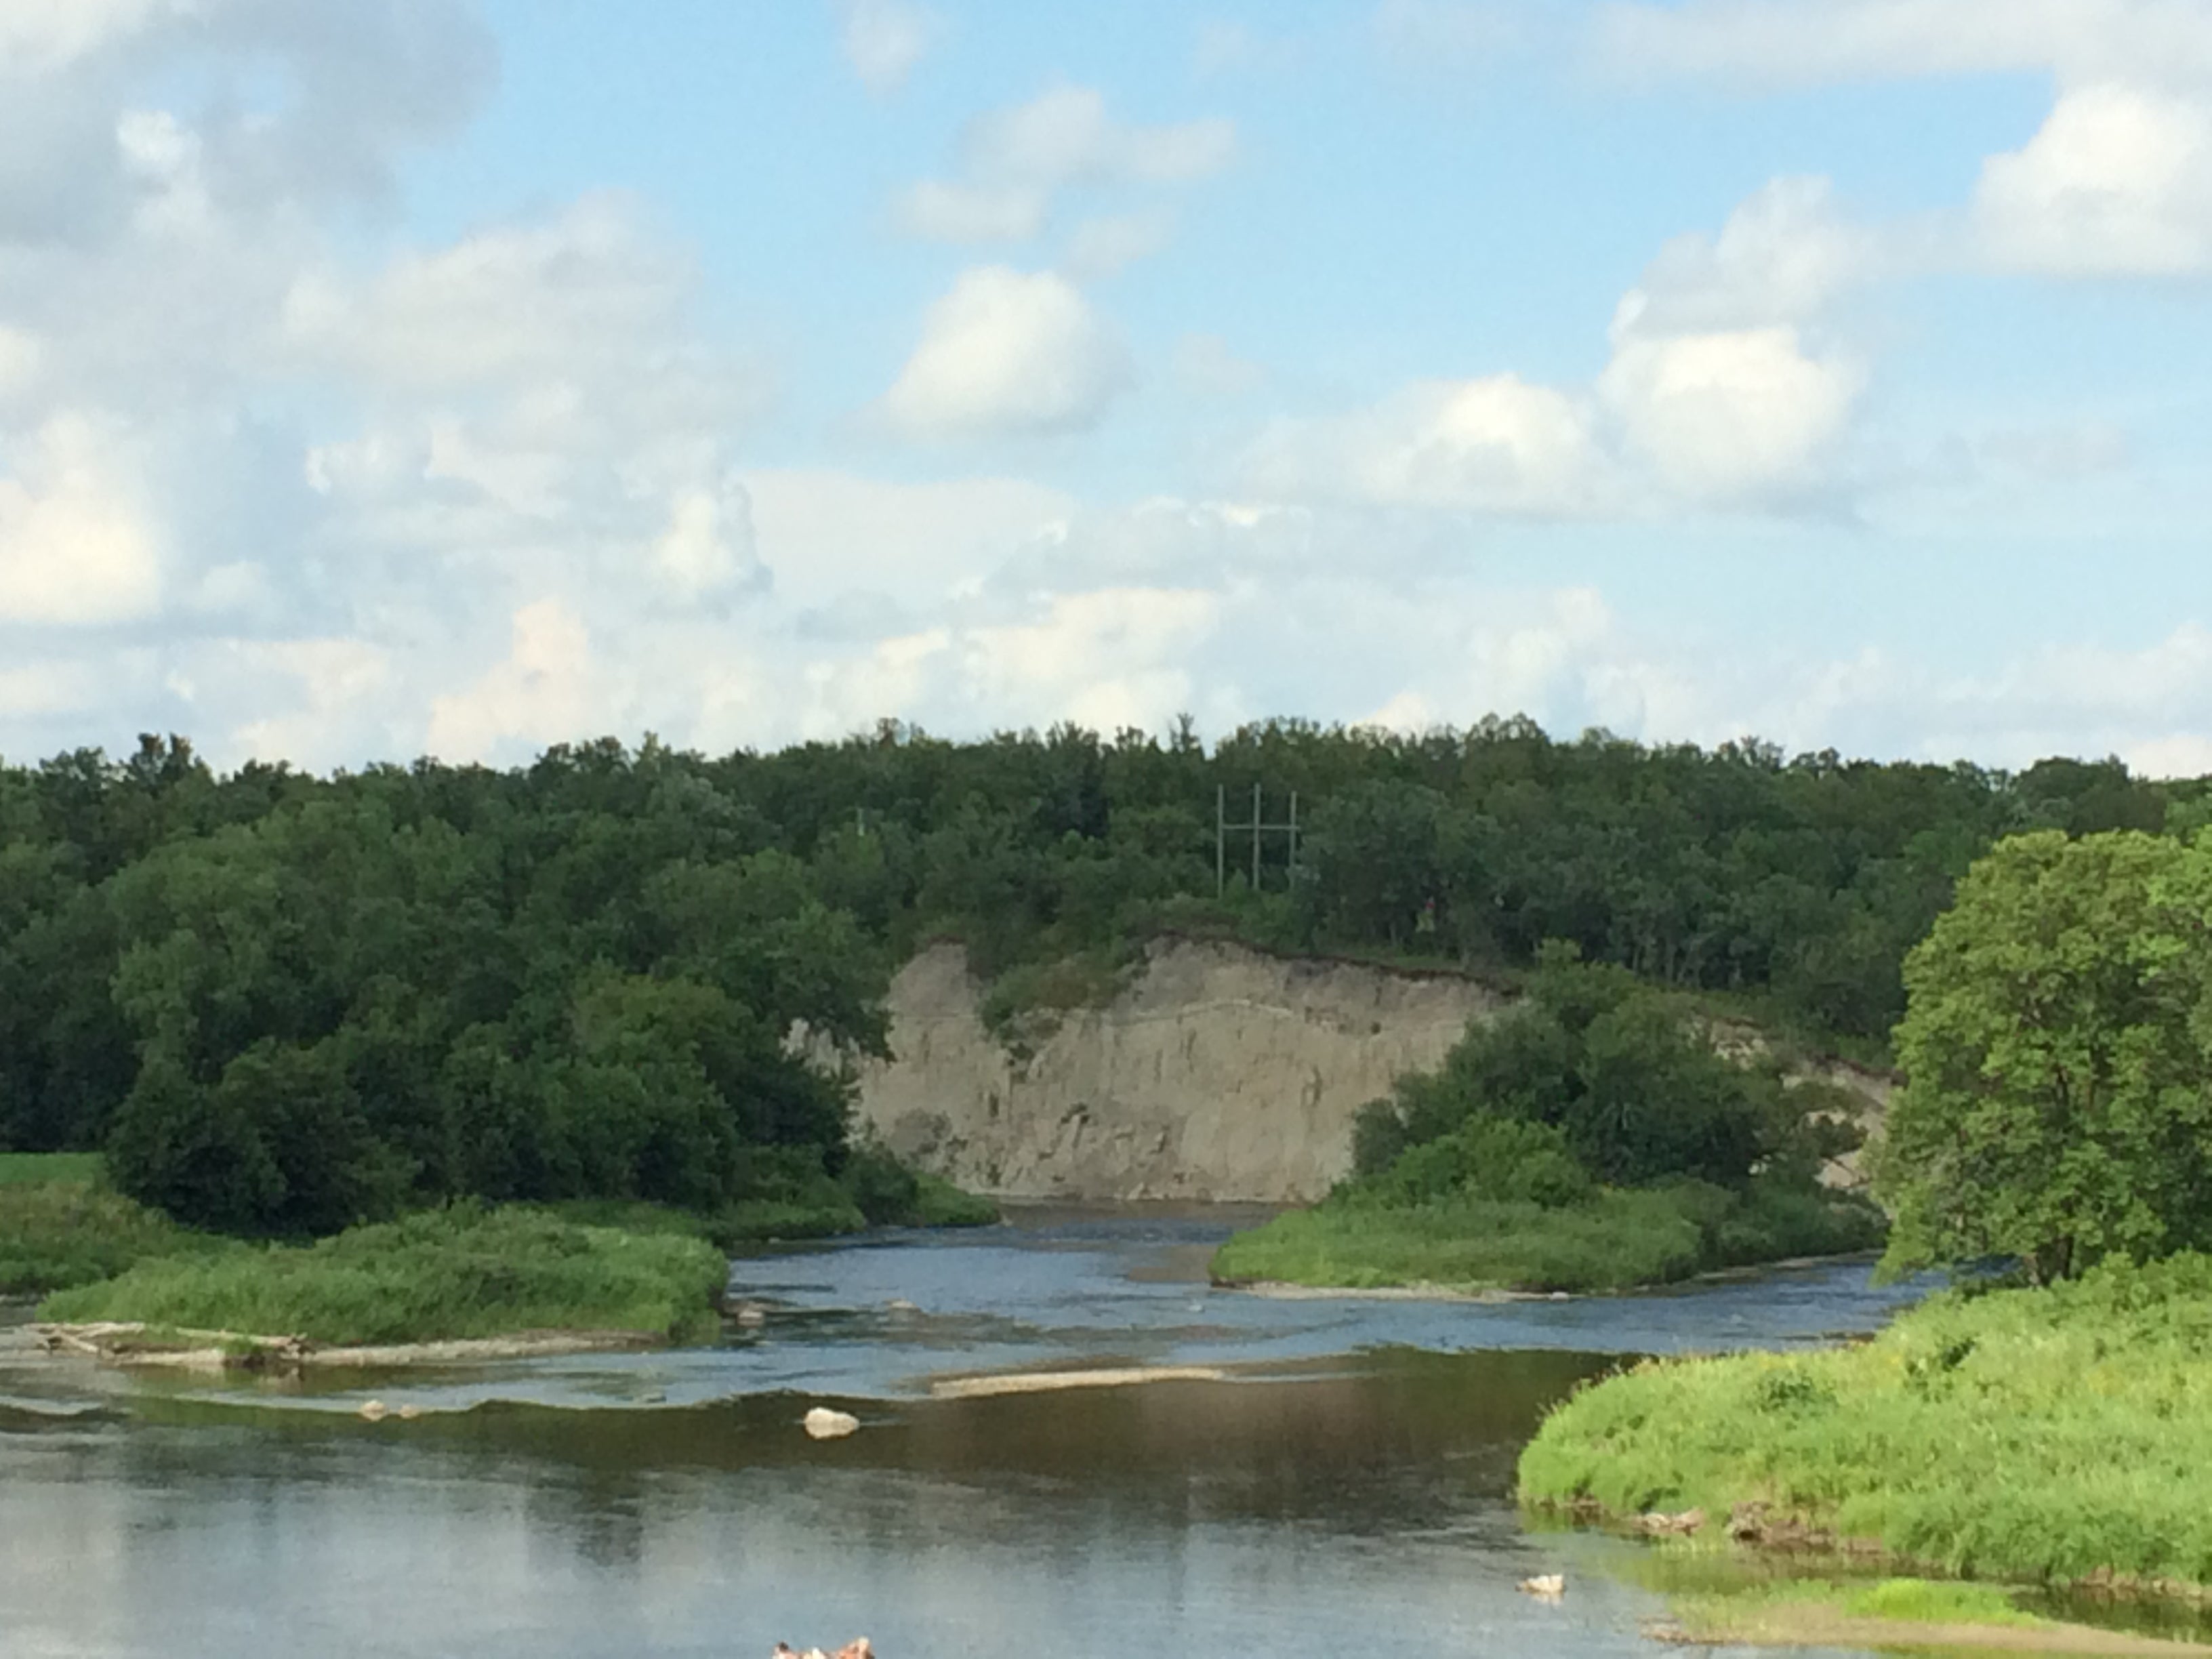 Camper submitted image from Voyageur's View Campground, Tubing & Kayaking - 1